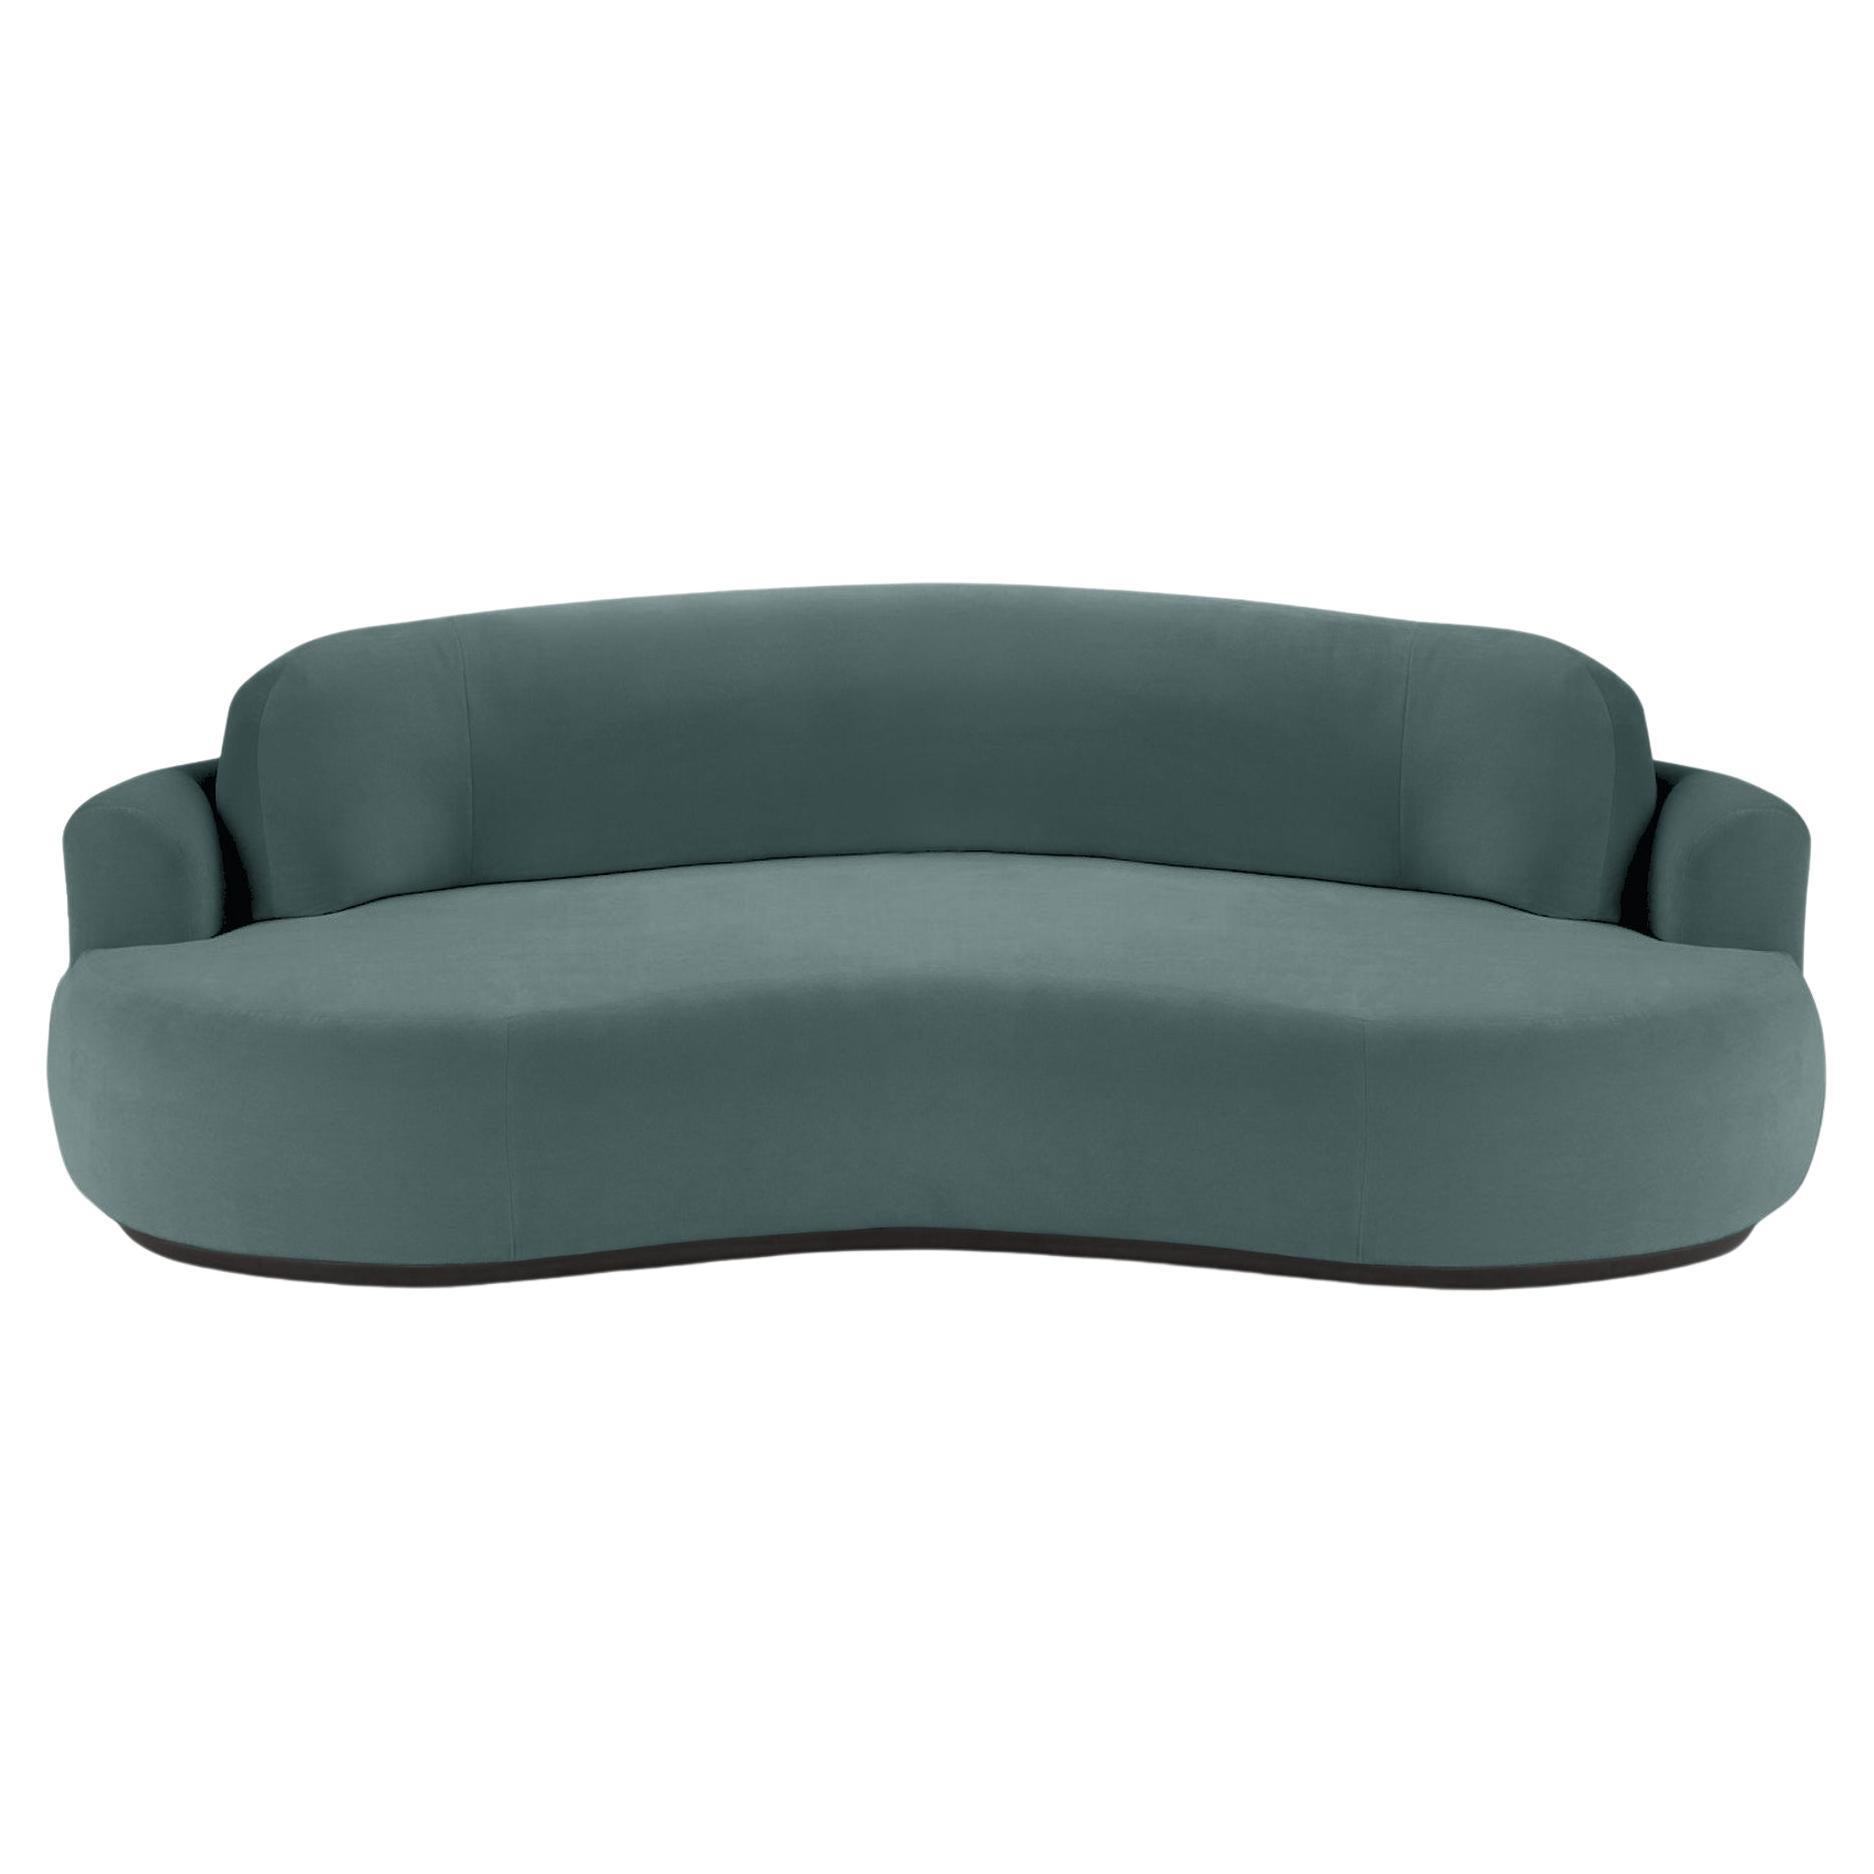 Naked Curved Sofa, Medium with Beech Ash-056-5 and Teal For Sale